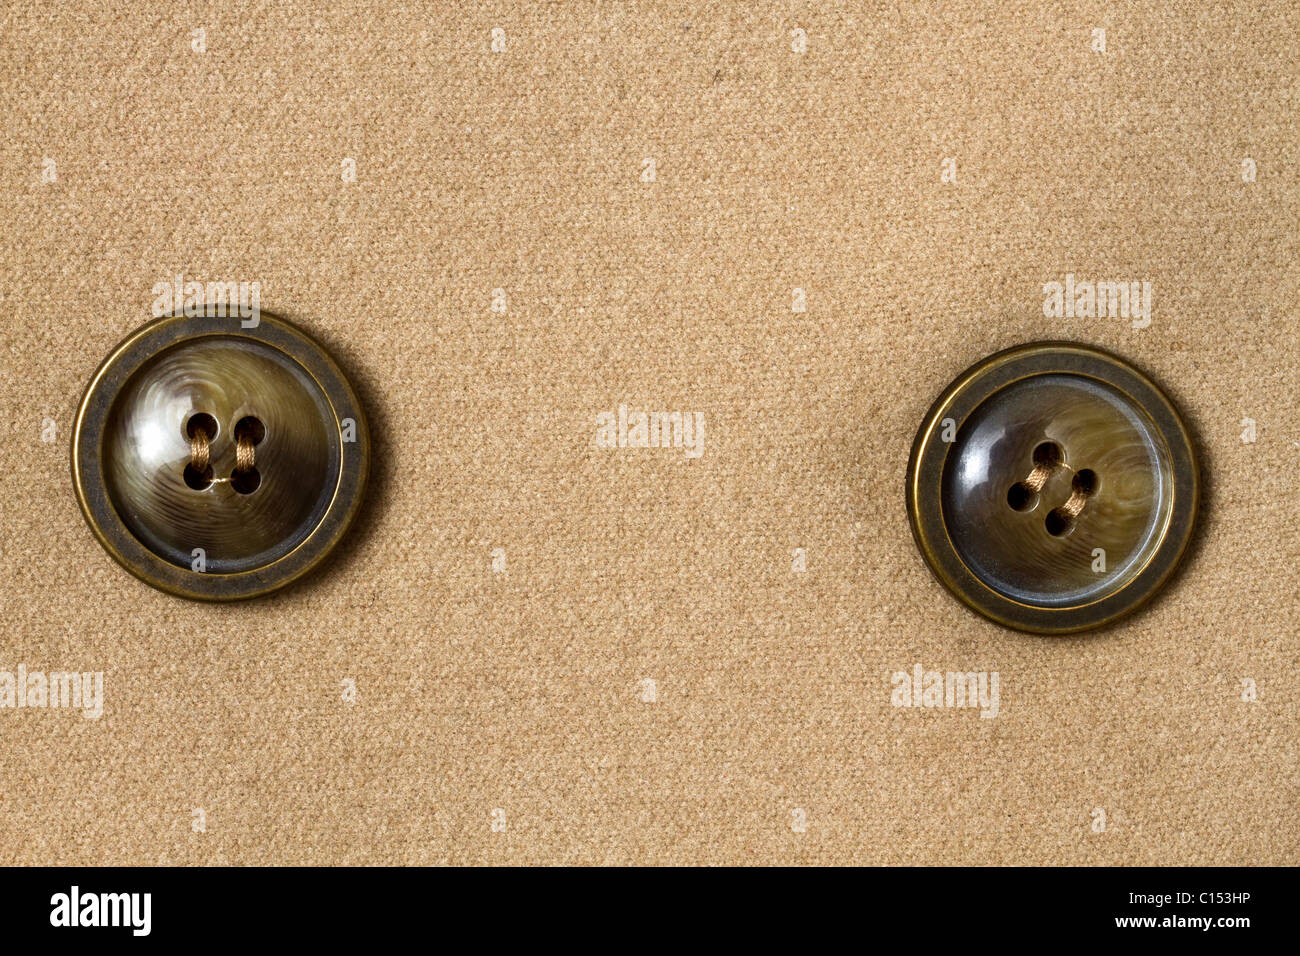 Two big buttons fixed on fabric background Stock Photo